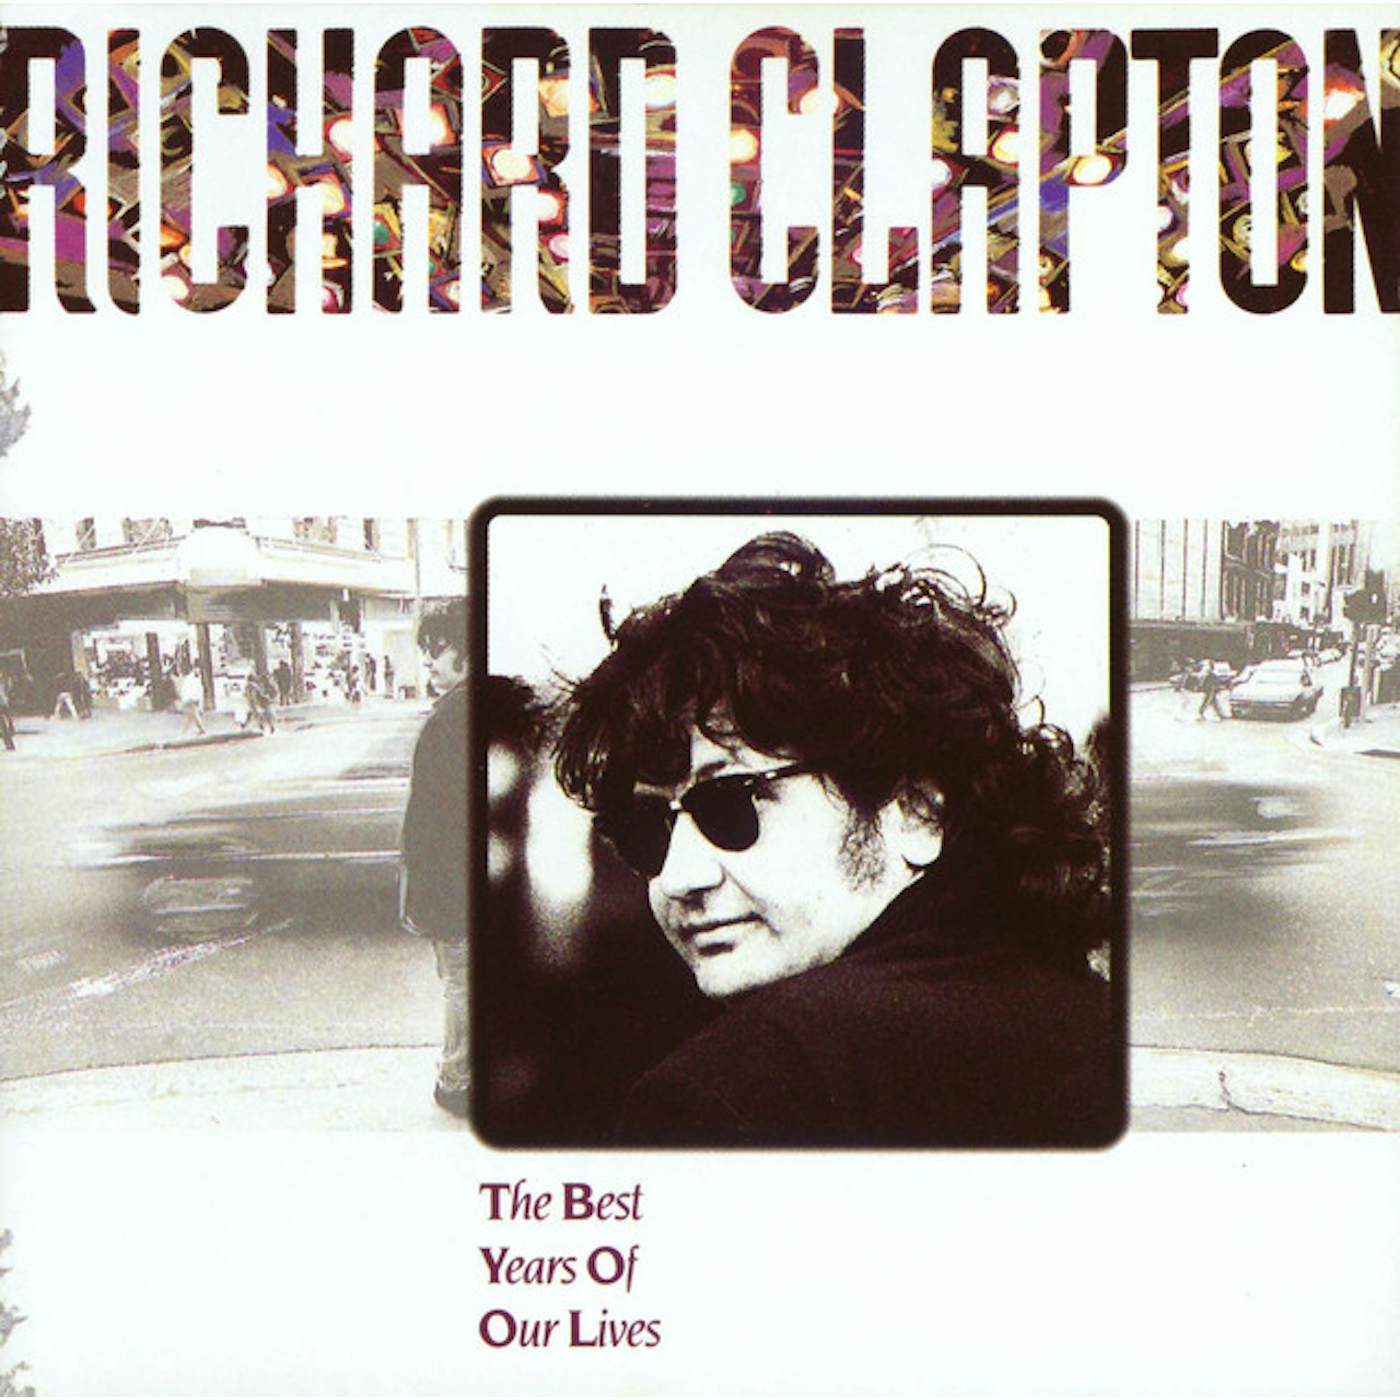 Richard Clapton BEST YEARD OF OUR LIVES CD